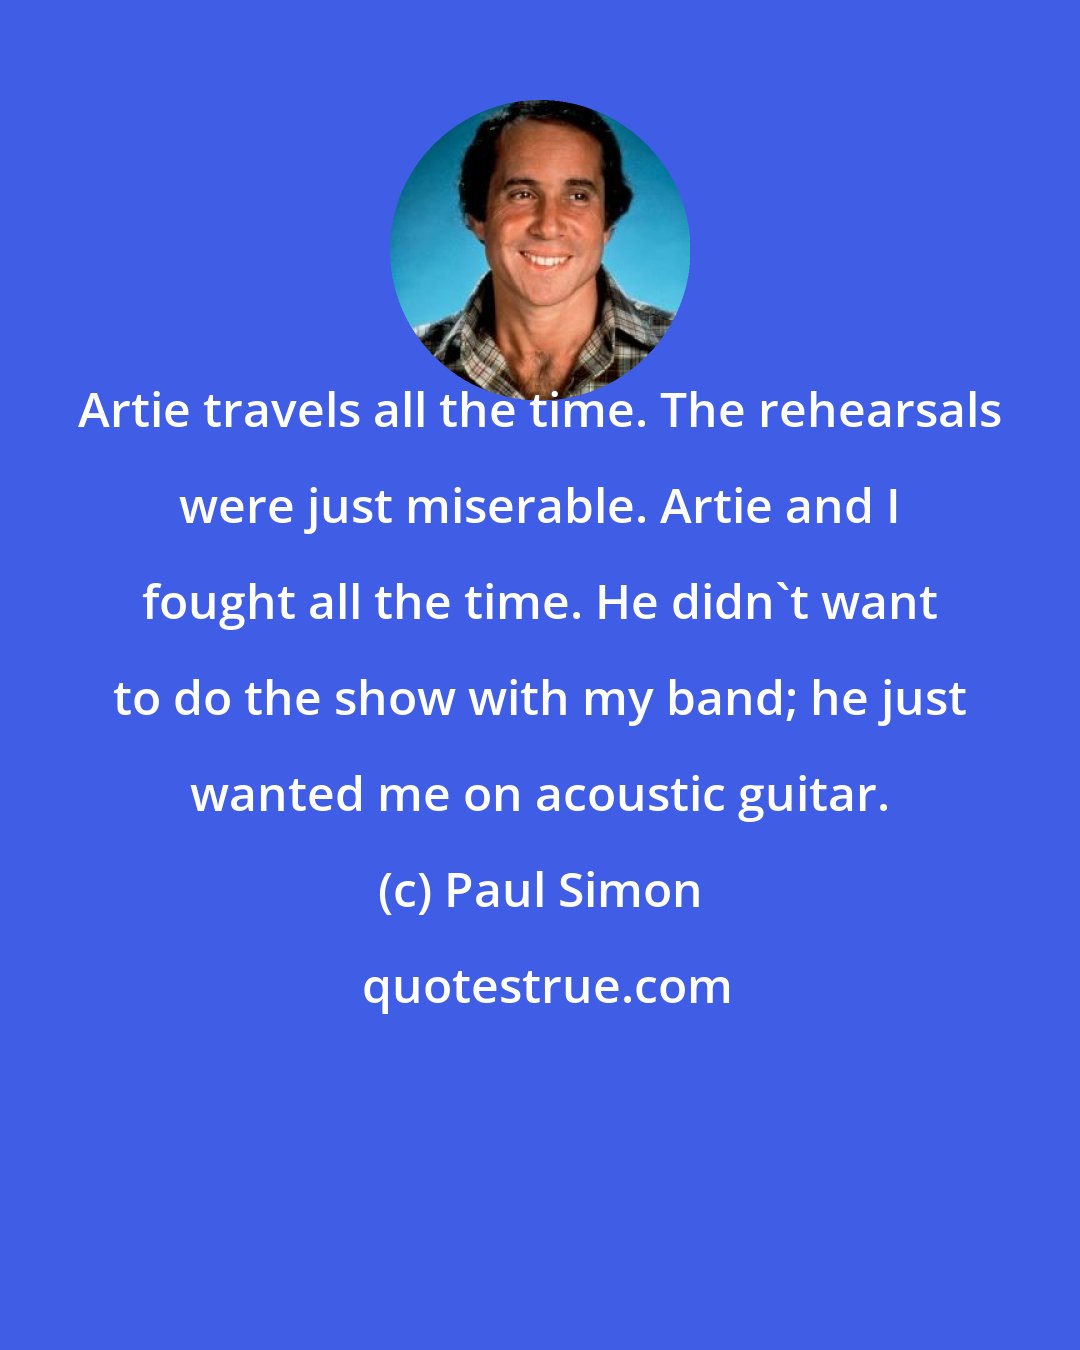 Paul Simon: Artie travels all the time. The rehearsals were just miserable. Artie and I fought all the time. He didn't want to do the show with my band; he just wanted me on acoustic guitar.